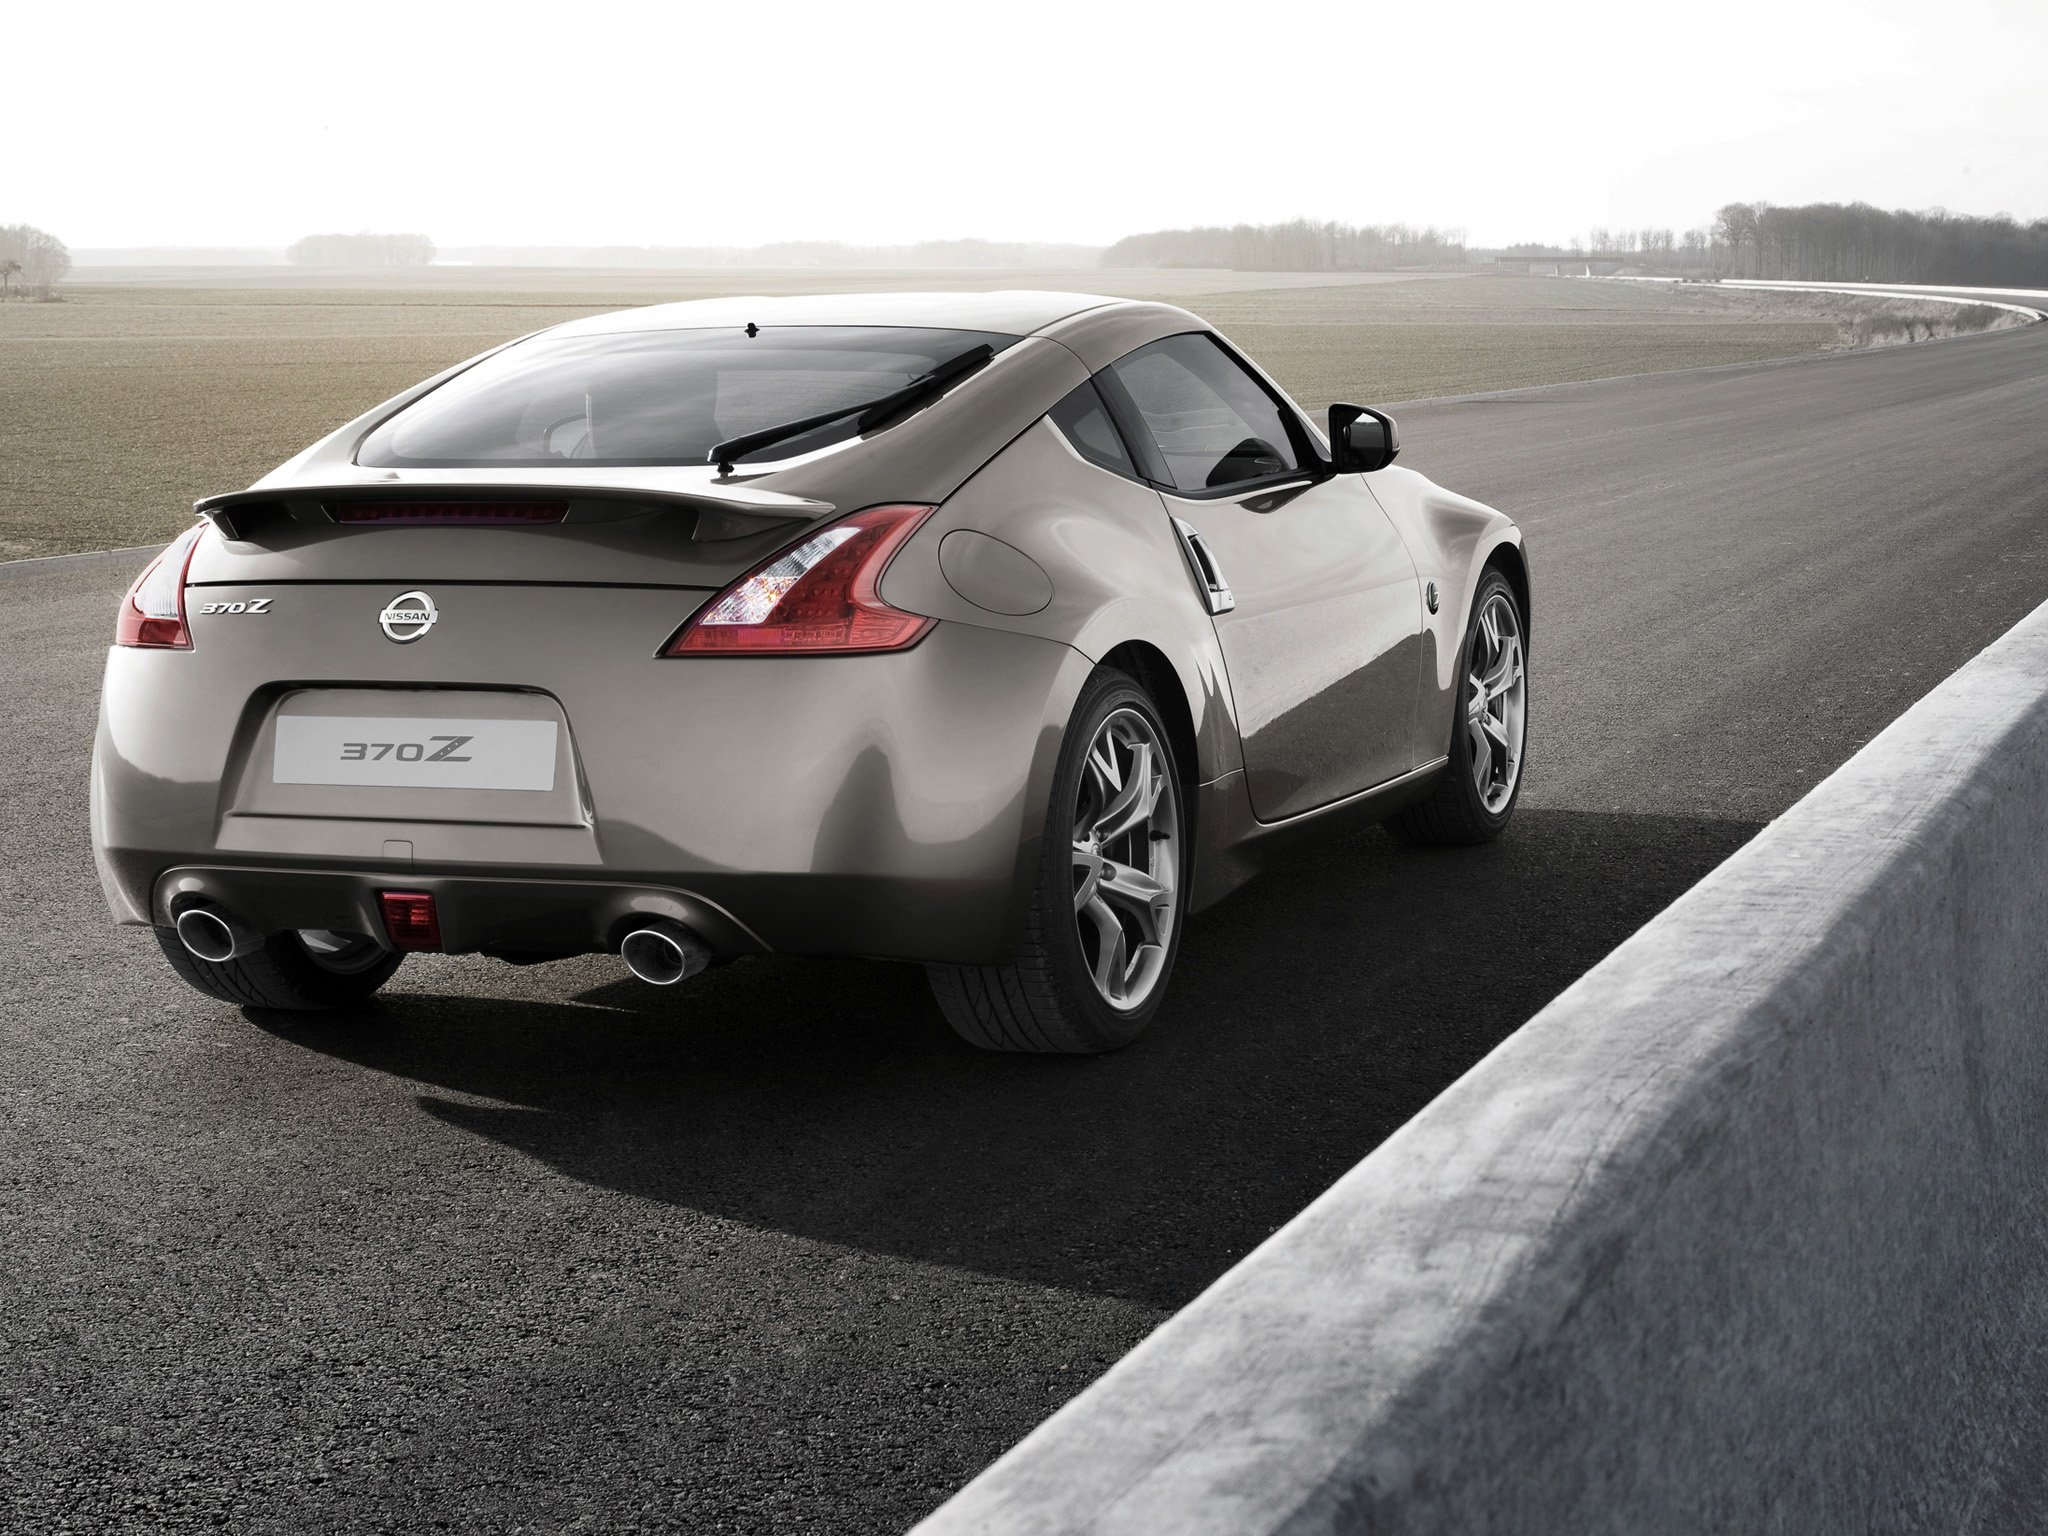 nissan, 370z, Cars, Coupe, 2009 Wallpaper